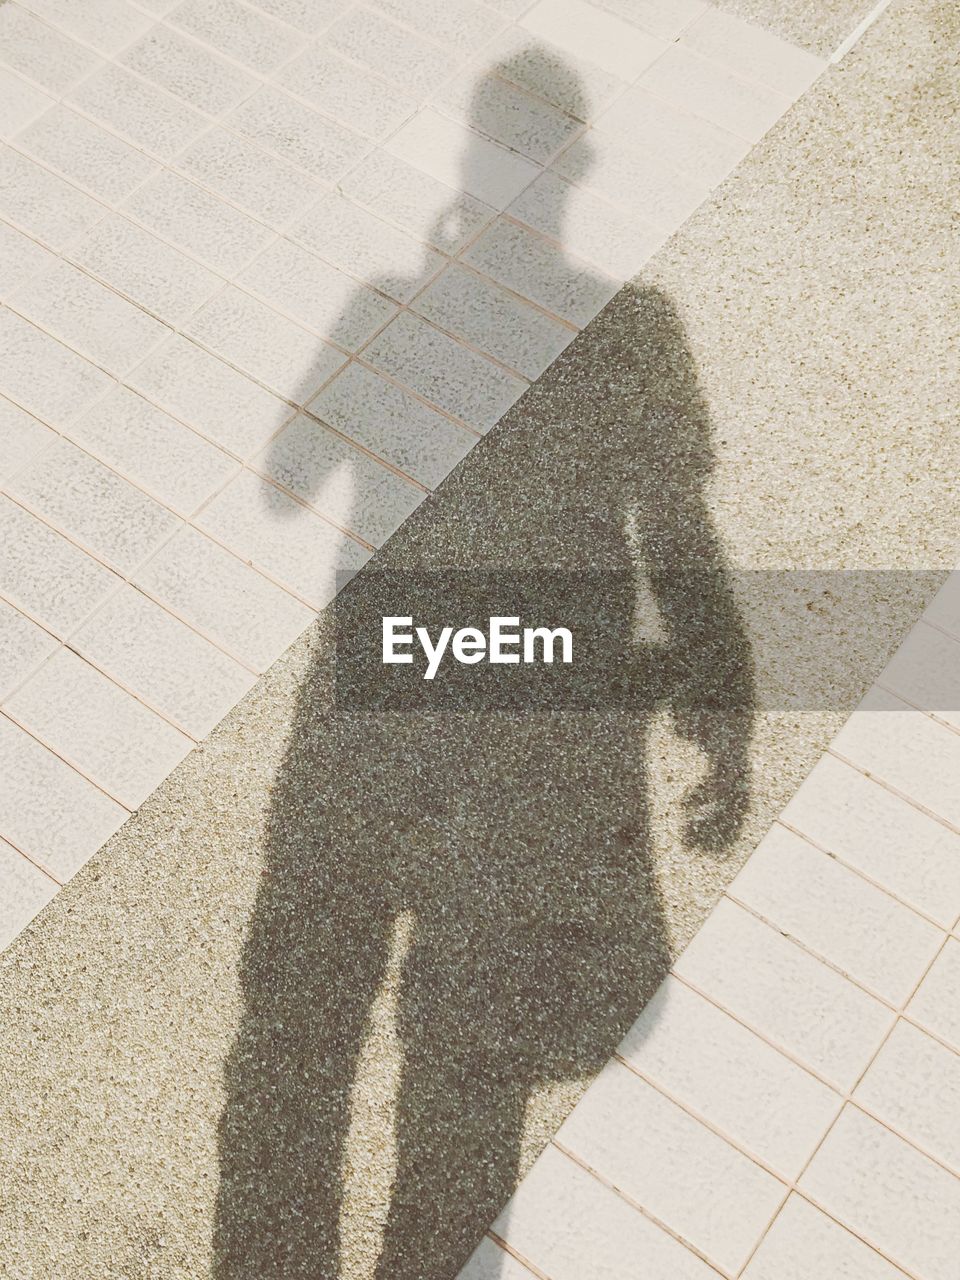 SHADOW OF PERSON ON STREET